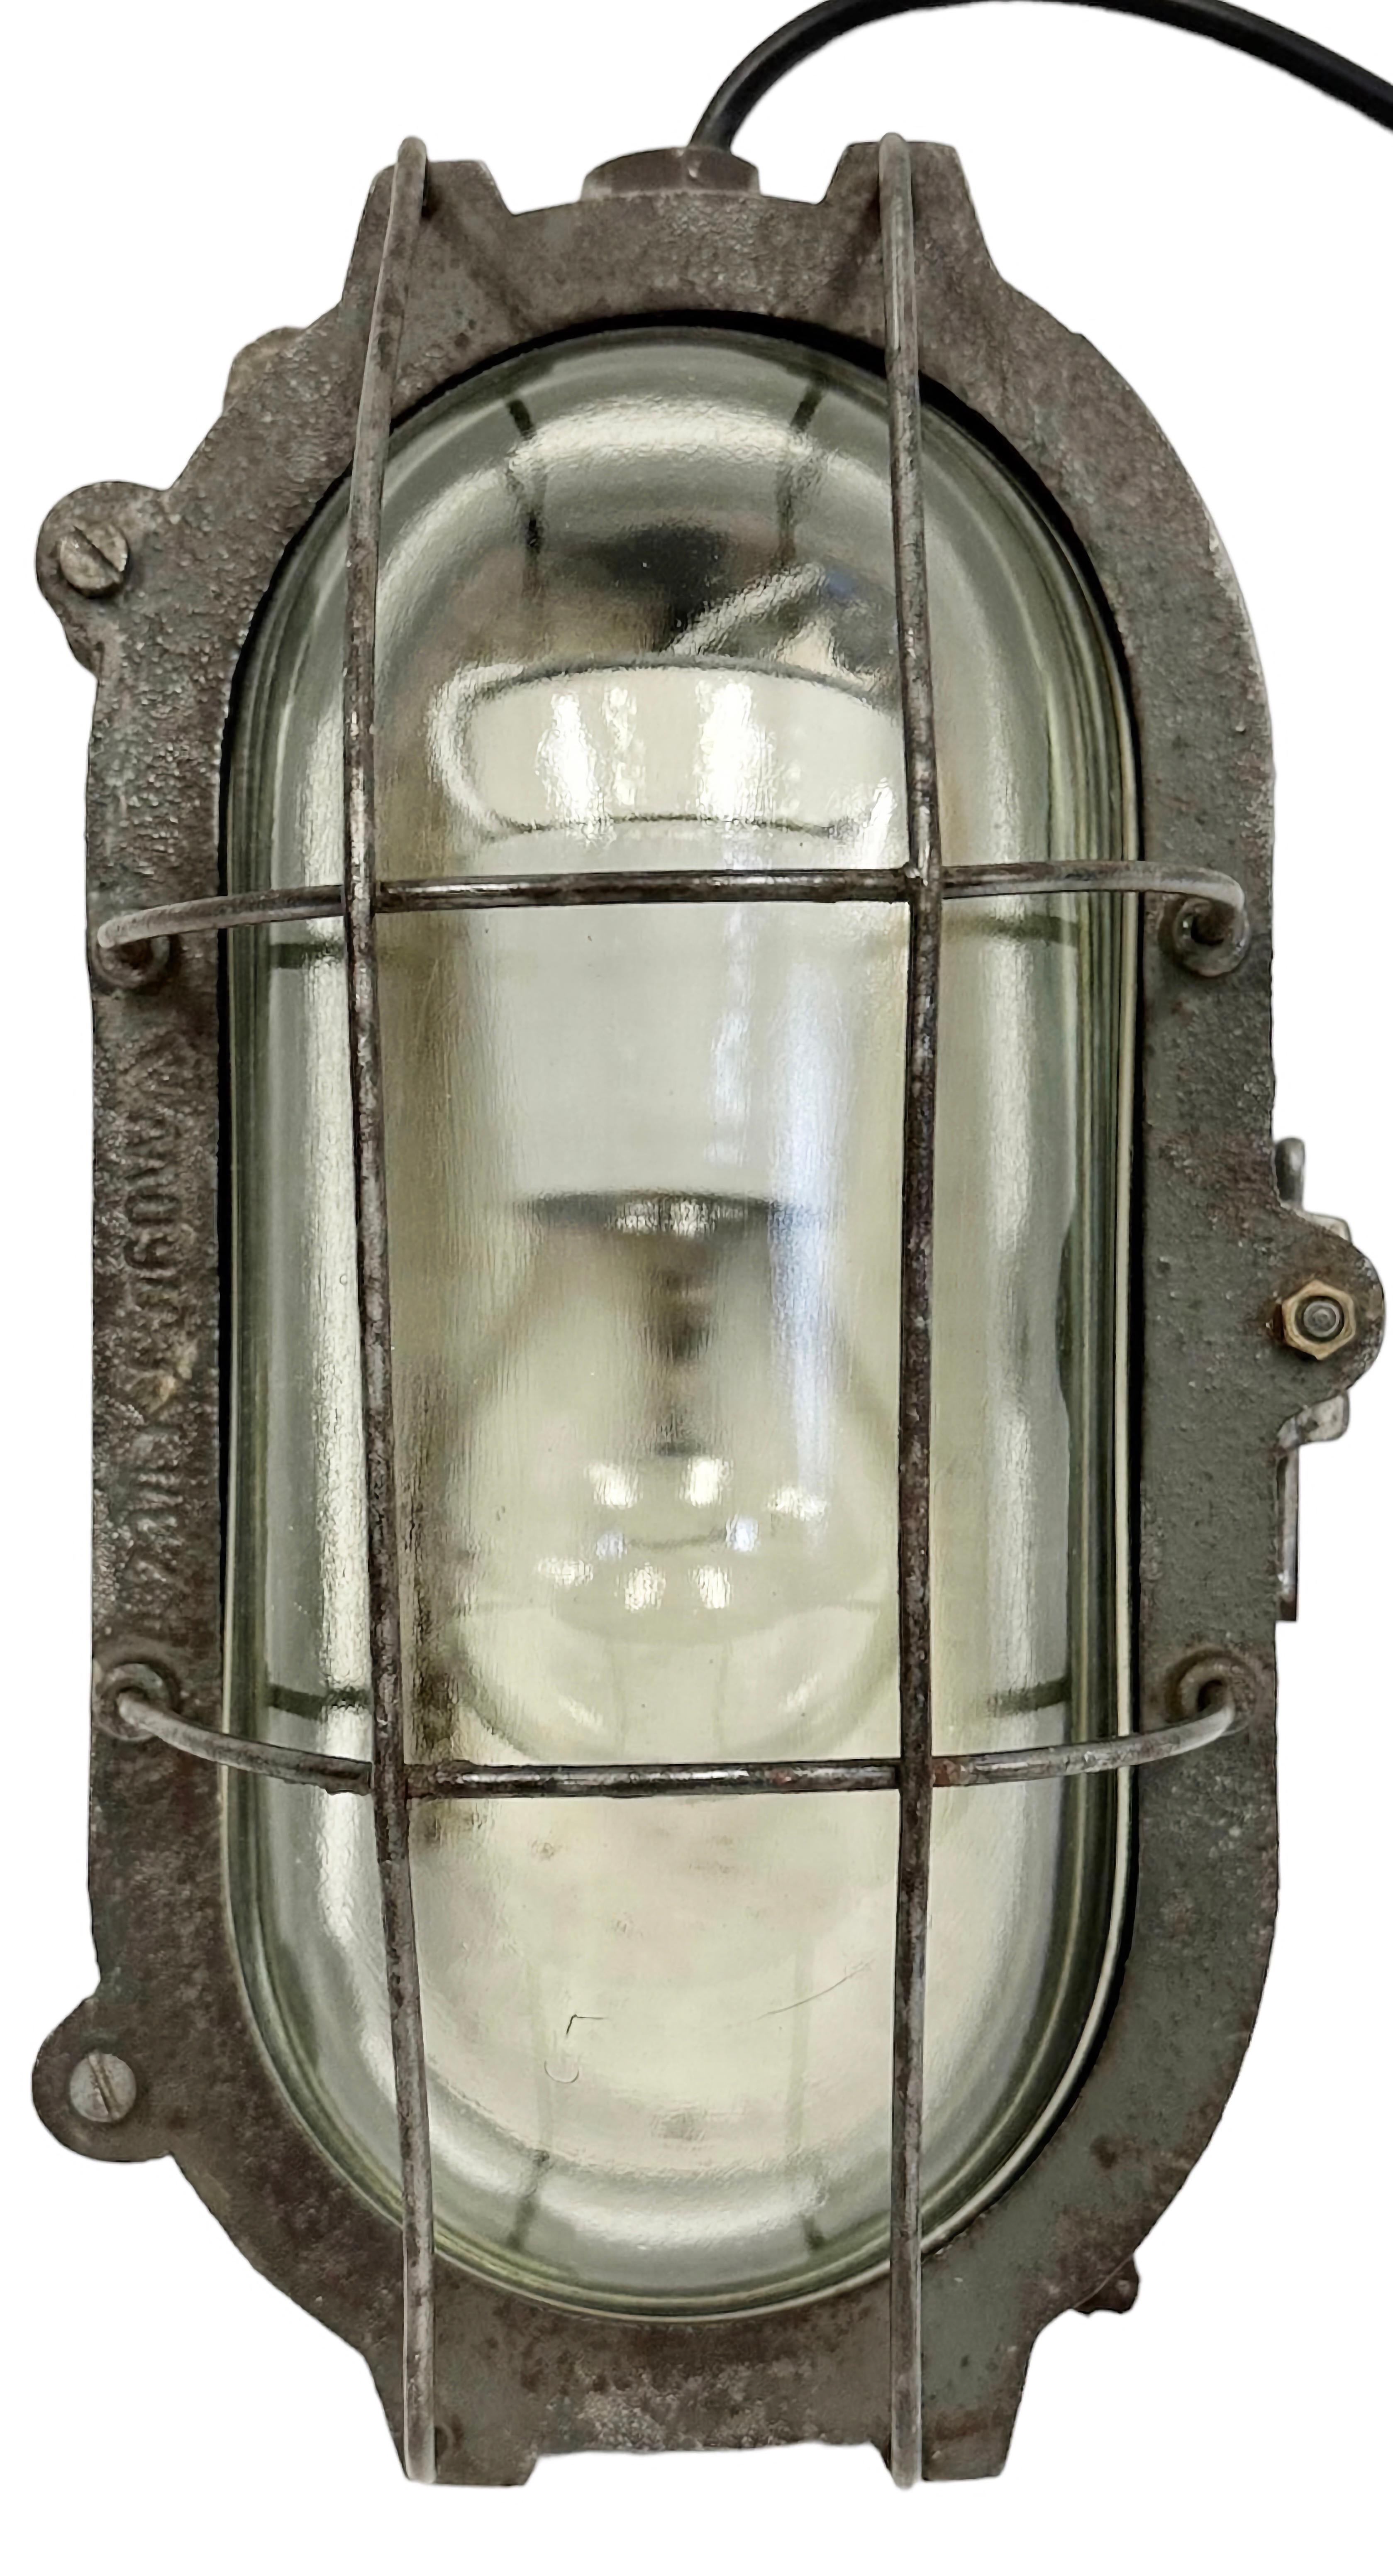 Industrial wall light made in Poland during the 1960s. It features a cast iron body, a clear glass cover and a steel grid.The porcelain socket requires E 27/ E 26 light bulbs. New wire. The weight of the light is 3.7 kg.